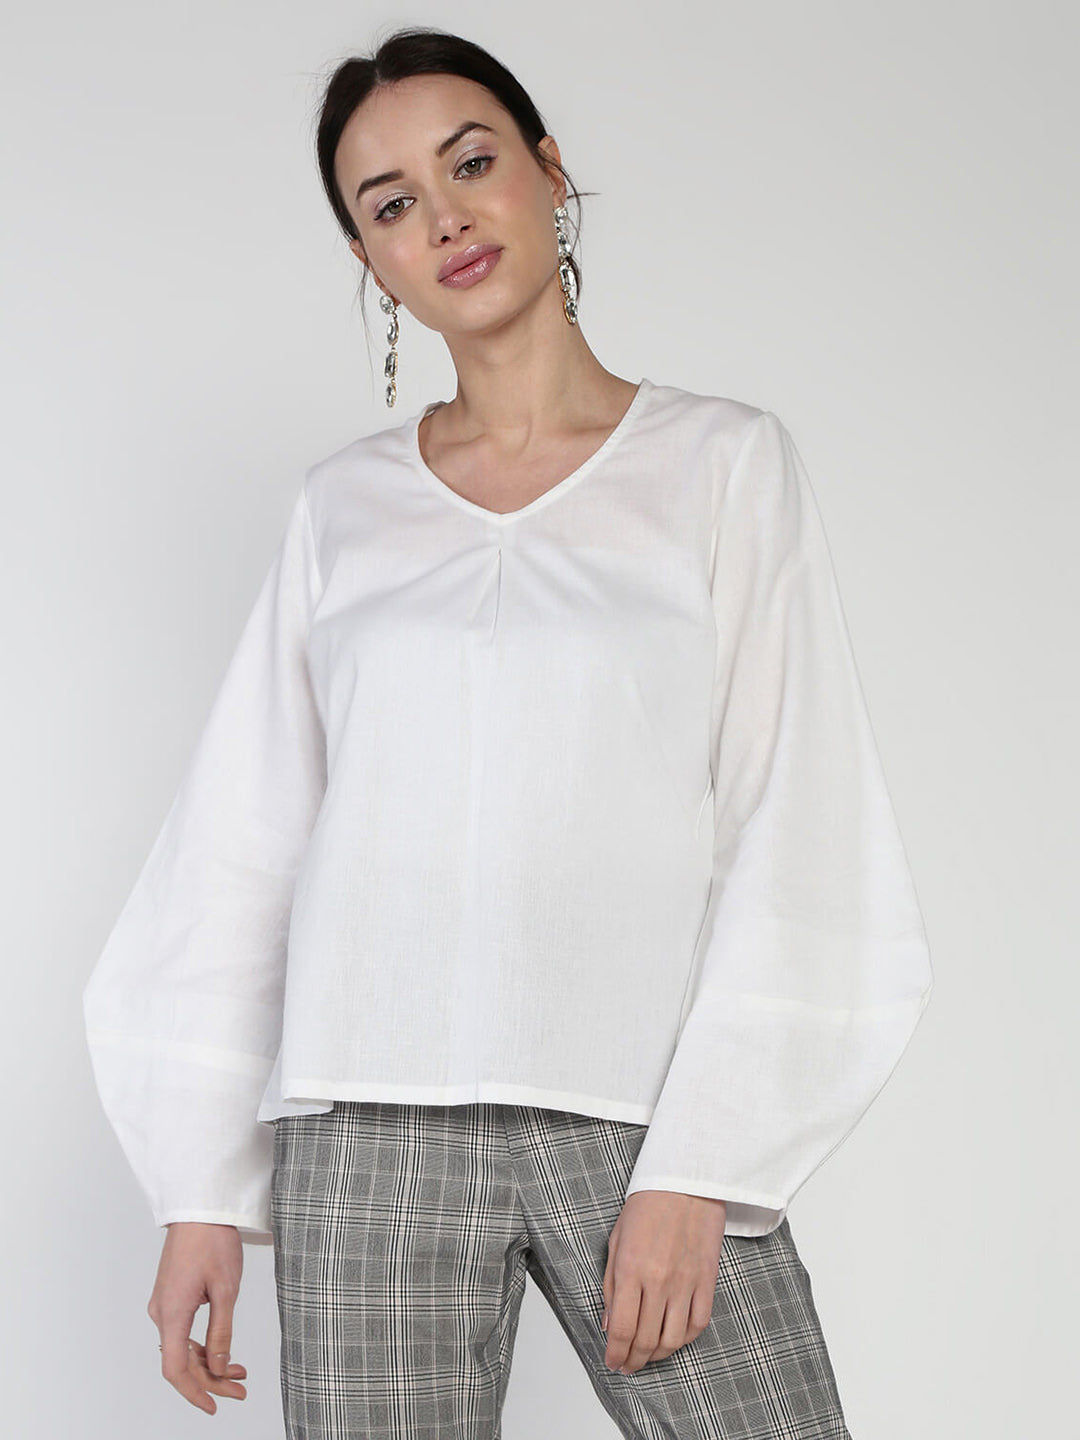 Inverted pleat solid Lantern sleeved cotton linen top